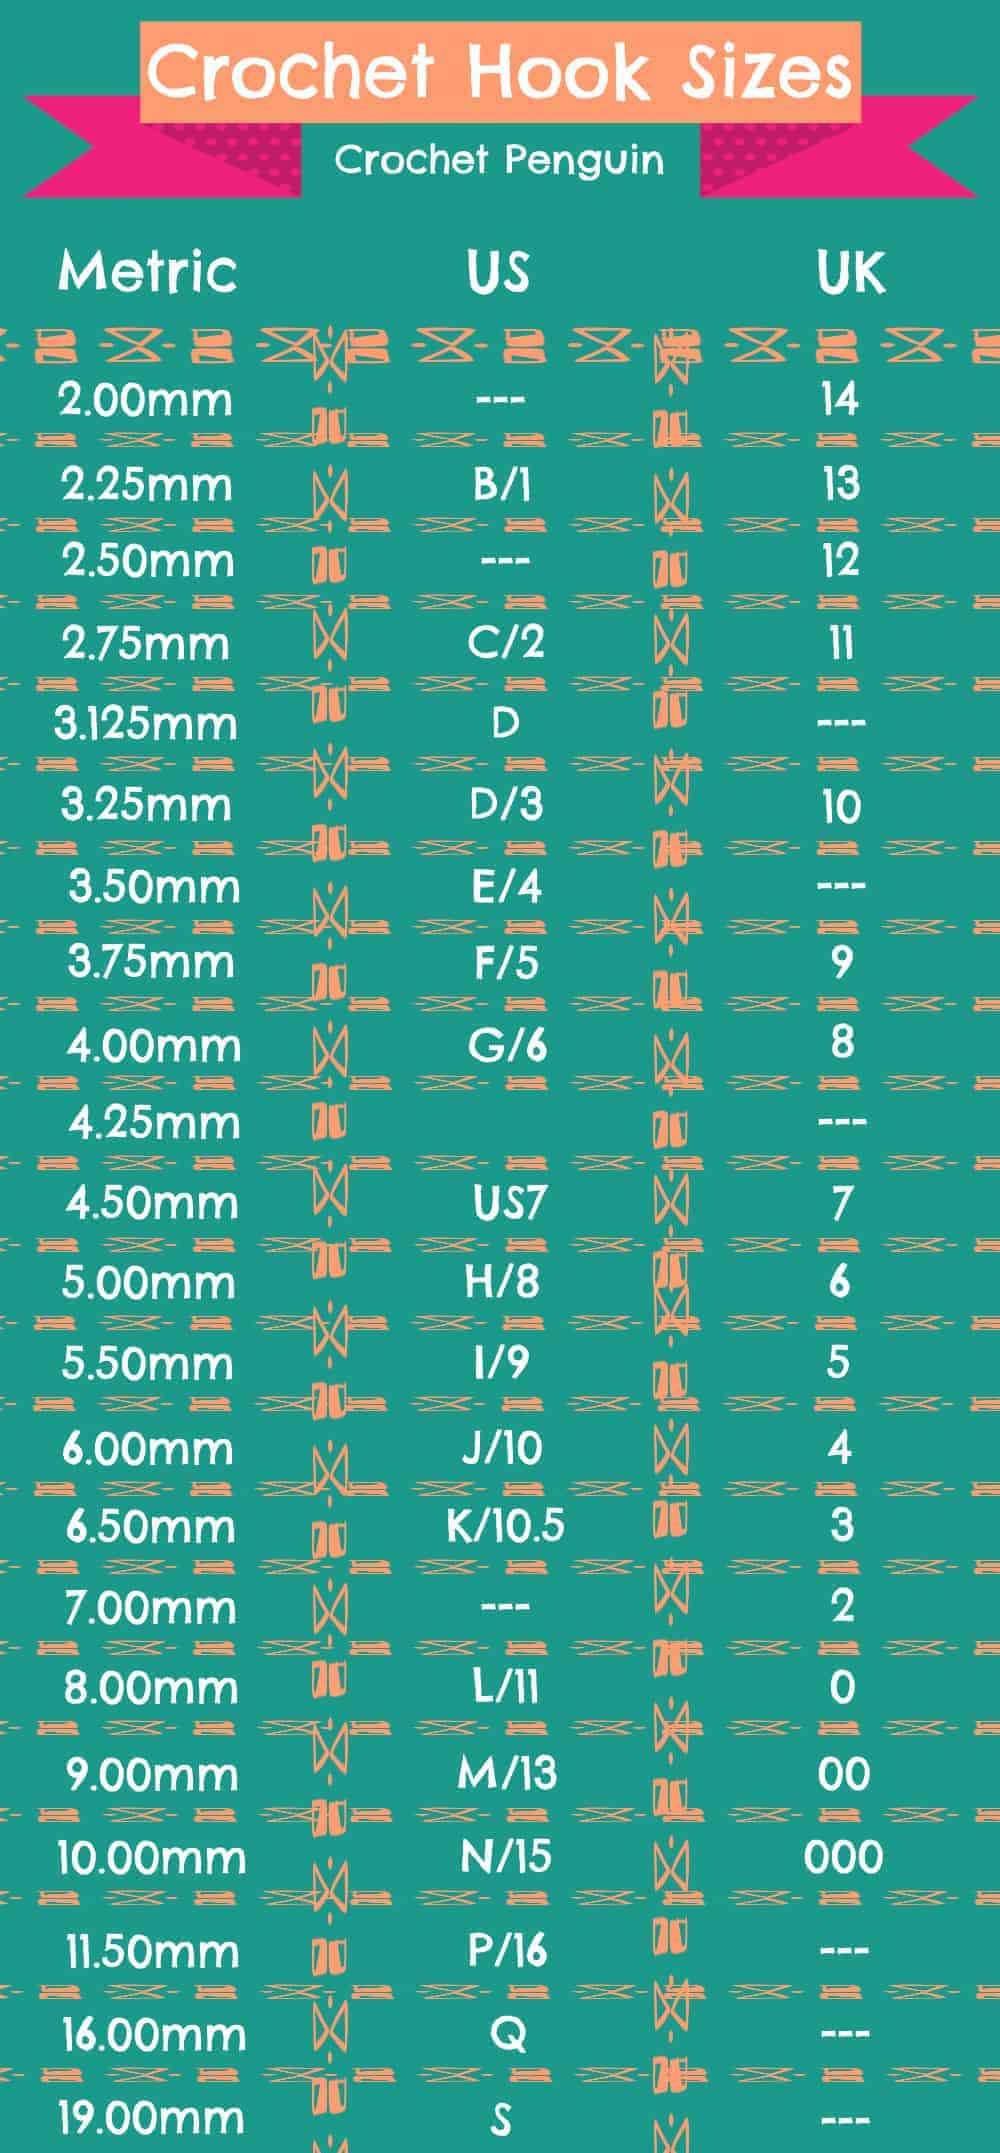 Crochet Hook Sizes Chart in Metric, US and UK sizes